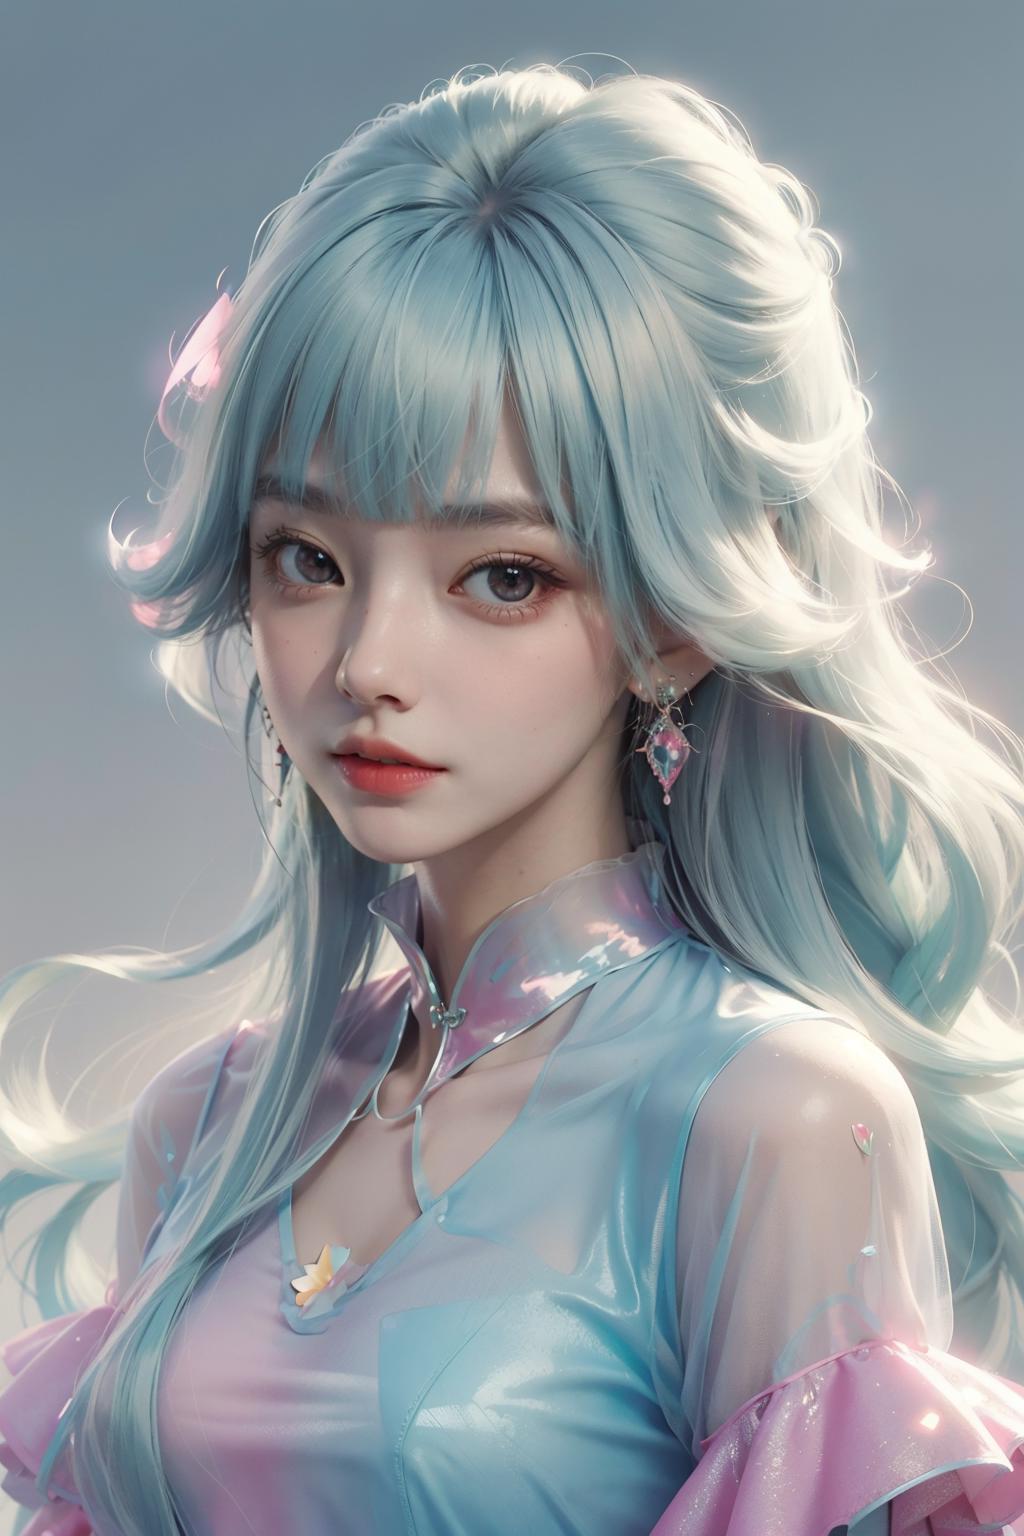 A beautifully rendered digital artwork of a young Asian woman with blue hair and a blue dress.